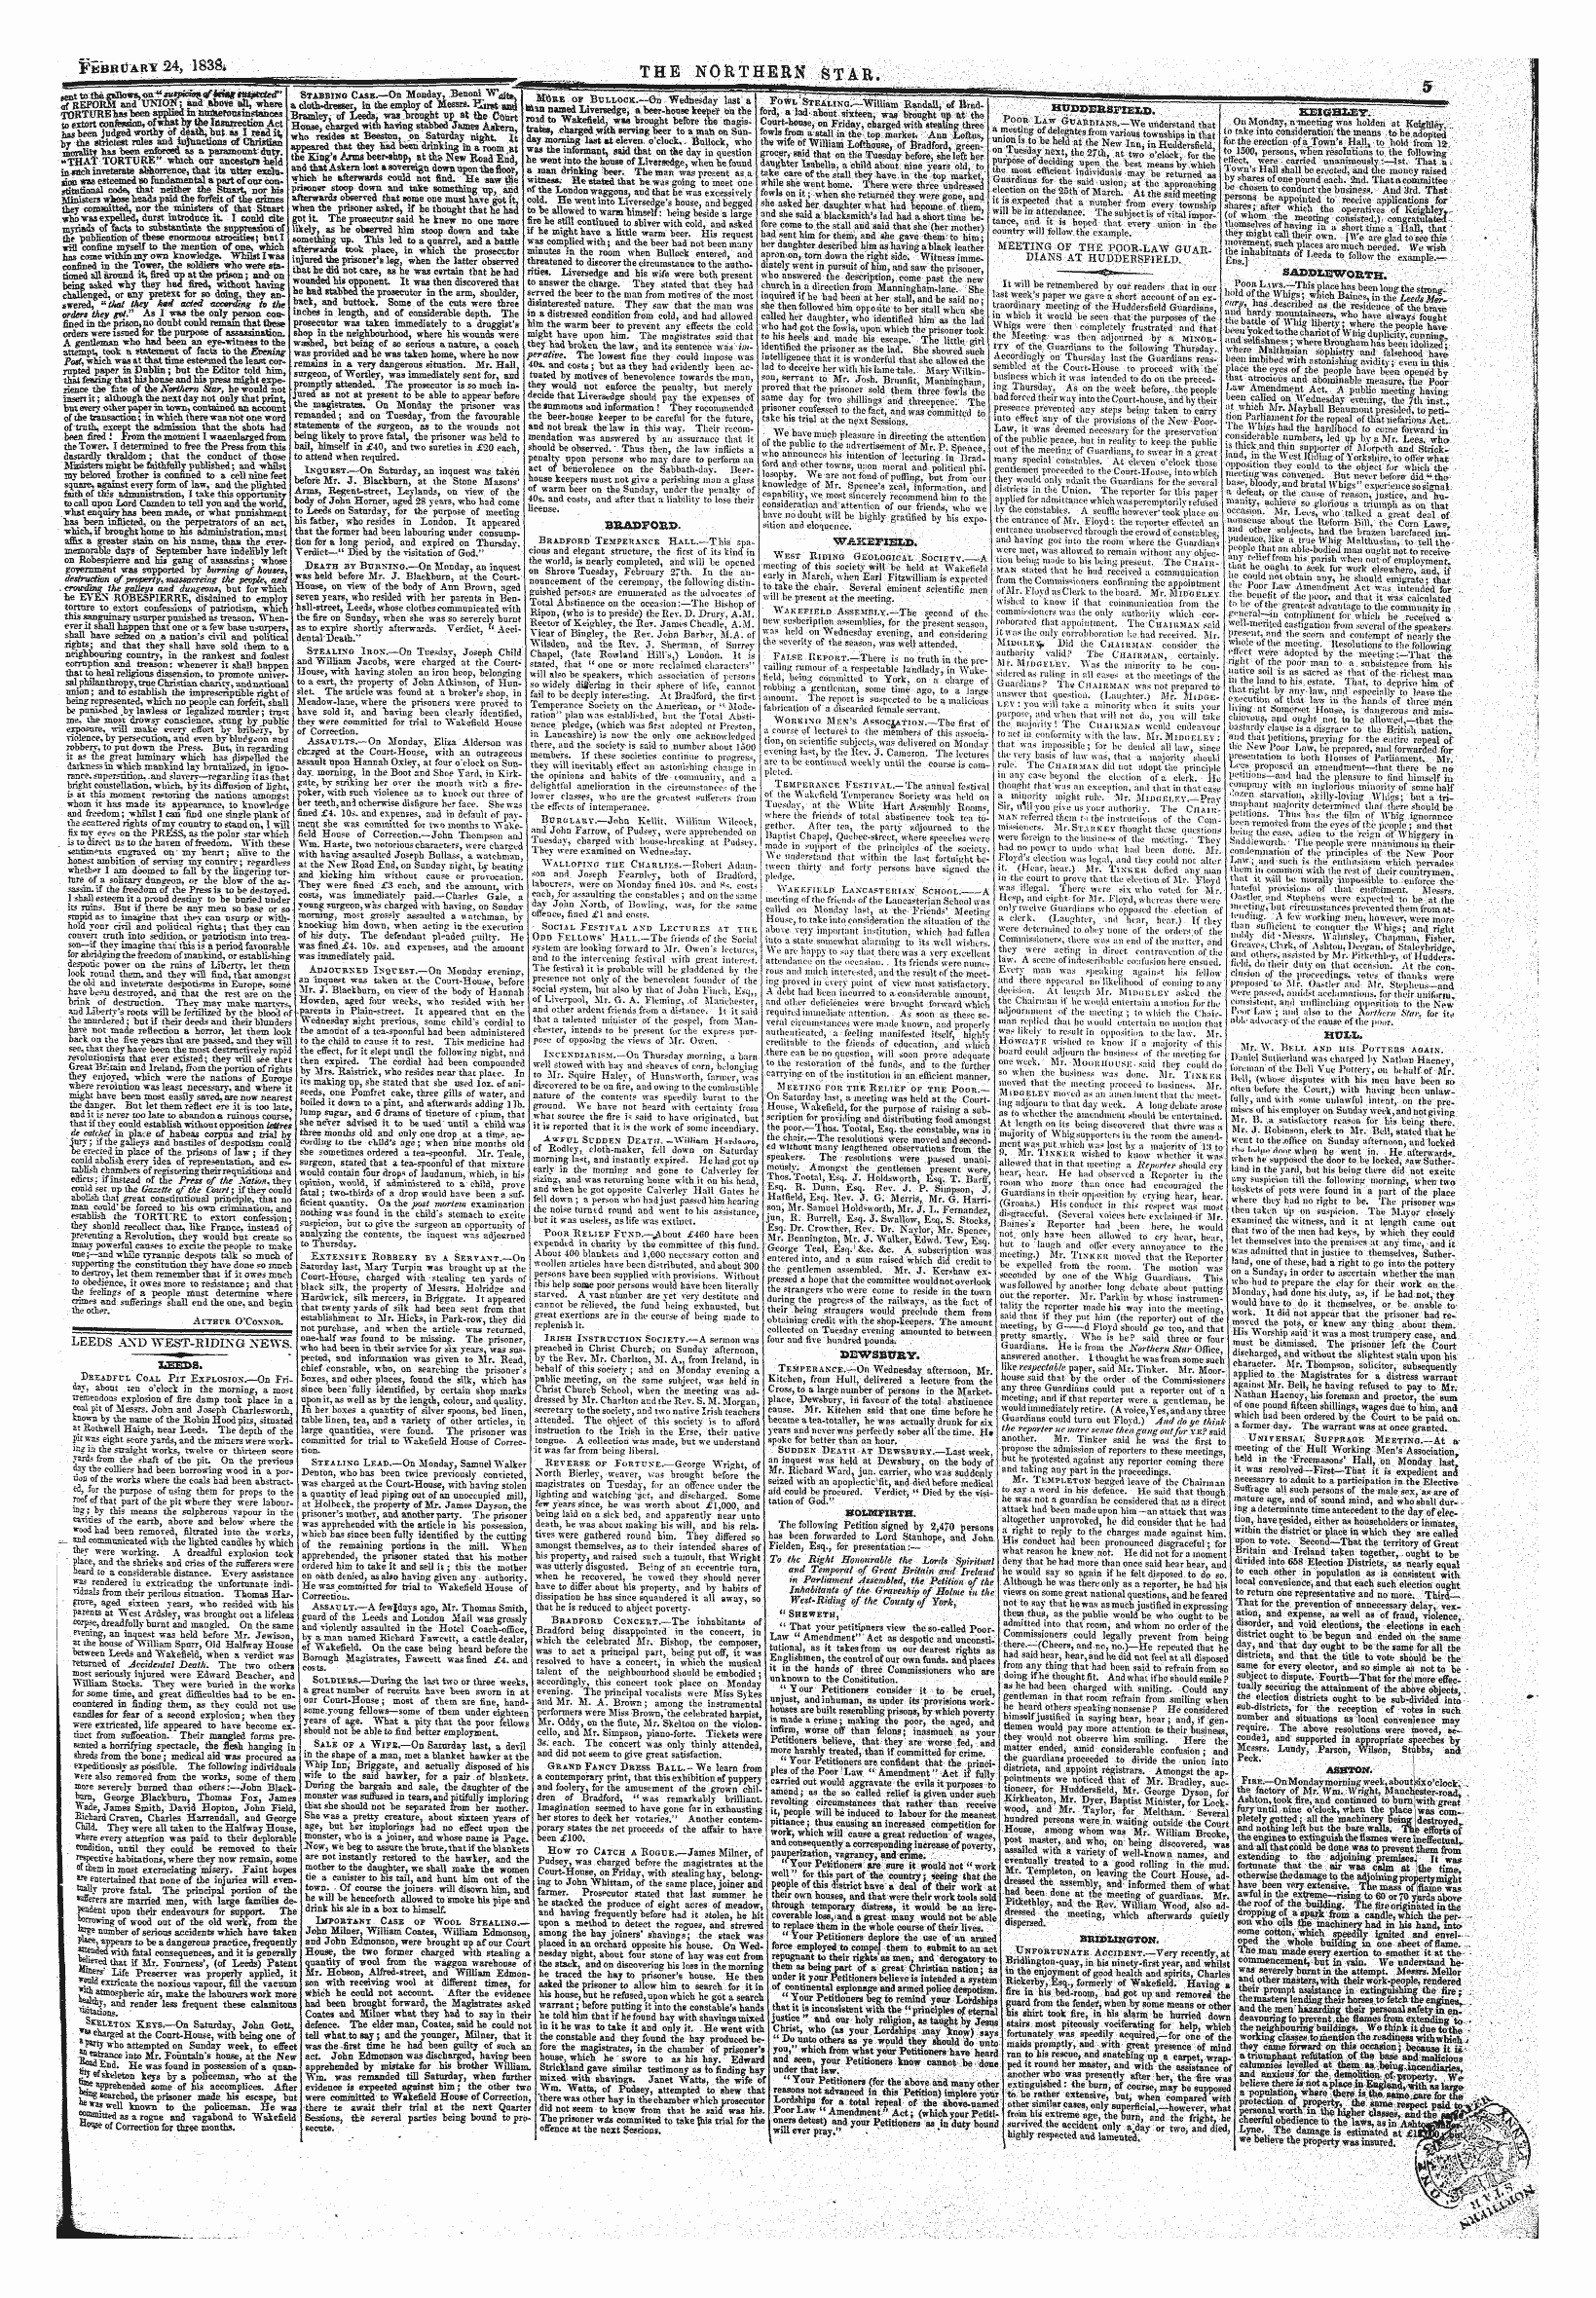 Northern Star (1837-1852): jS F Y, 1st edition - Leeds And West-Eiding News. ^M